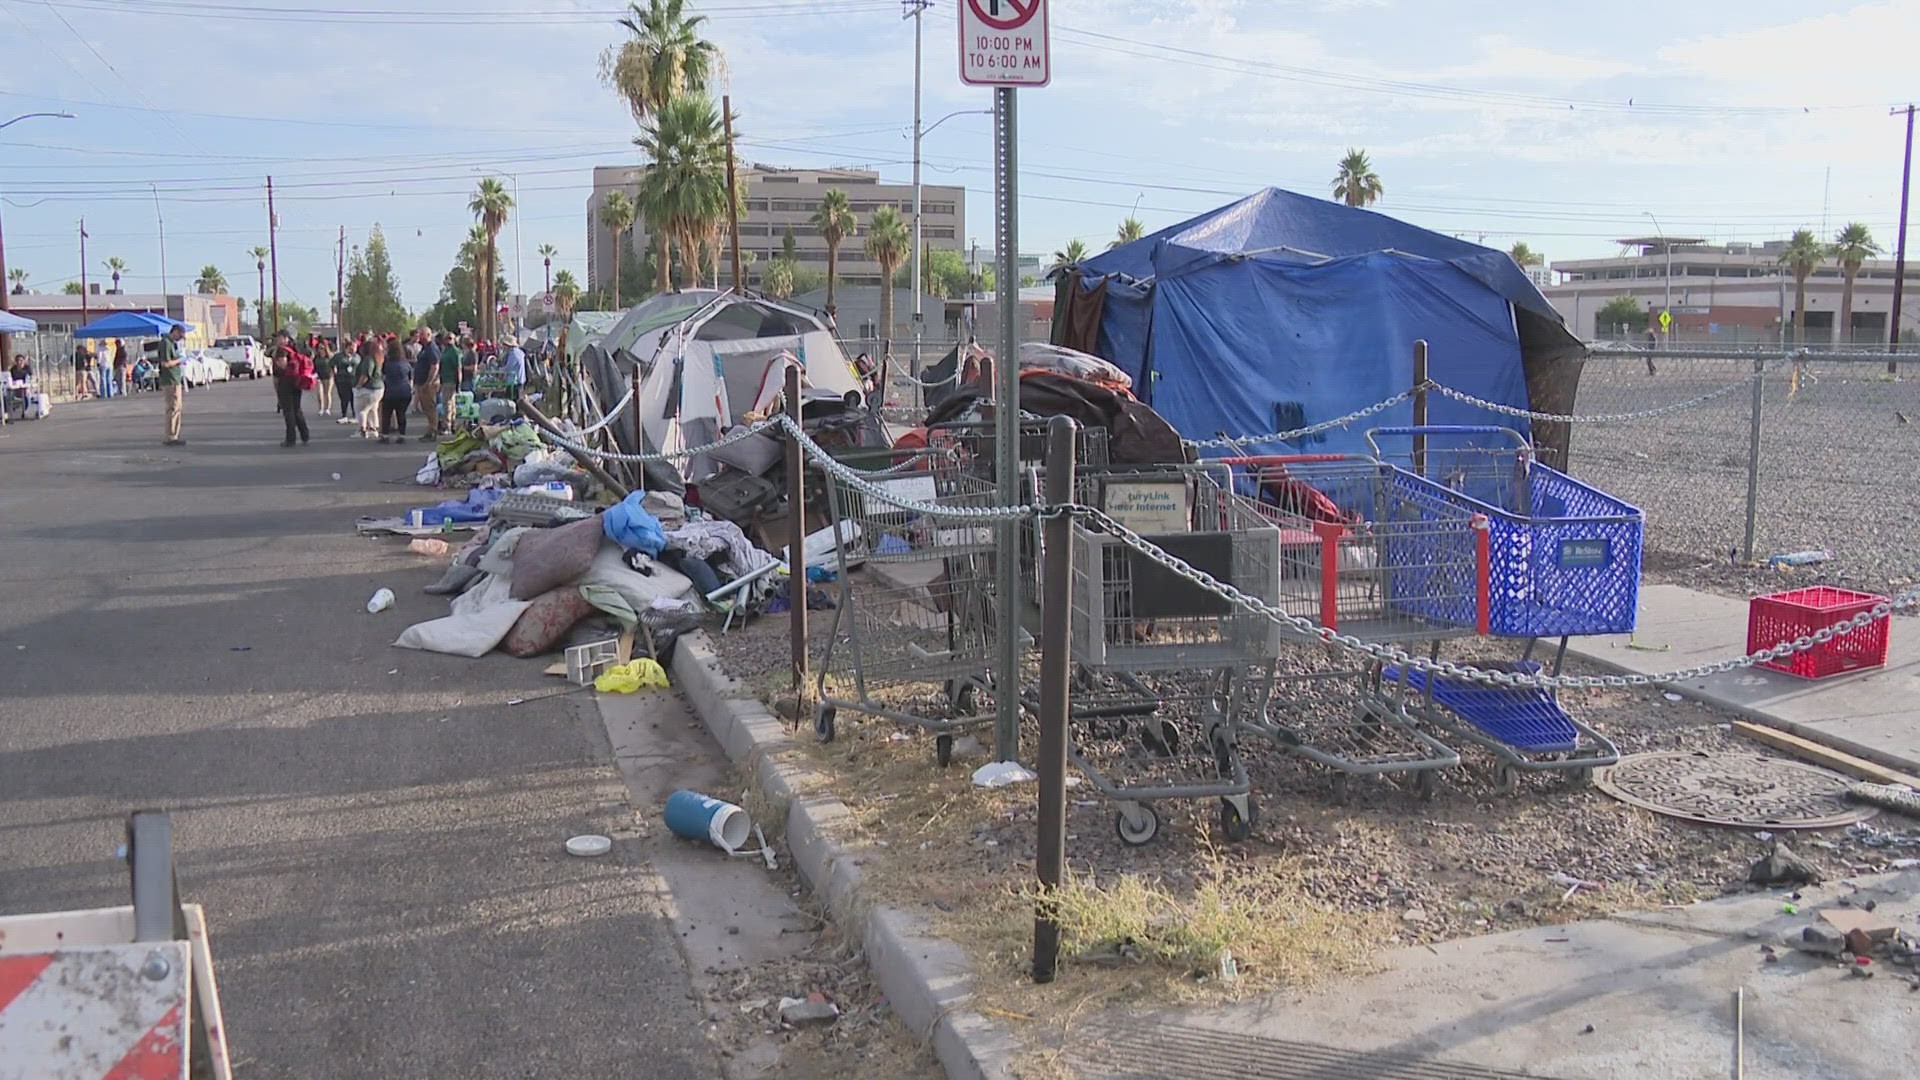 The homeless issue has come up in Phoenix where a county judge ruled last year that the city couldn't allow camping and had to clear its largest encampment.